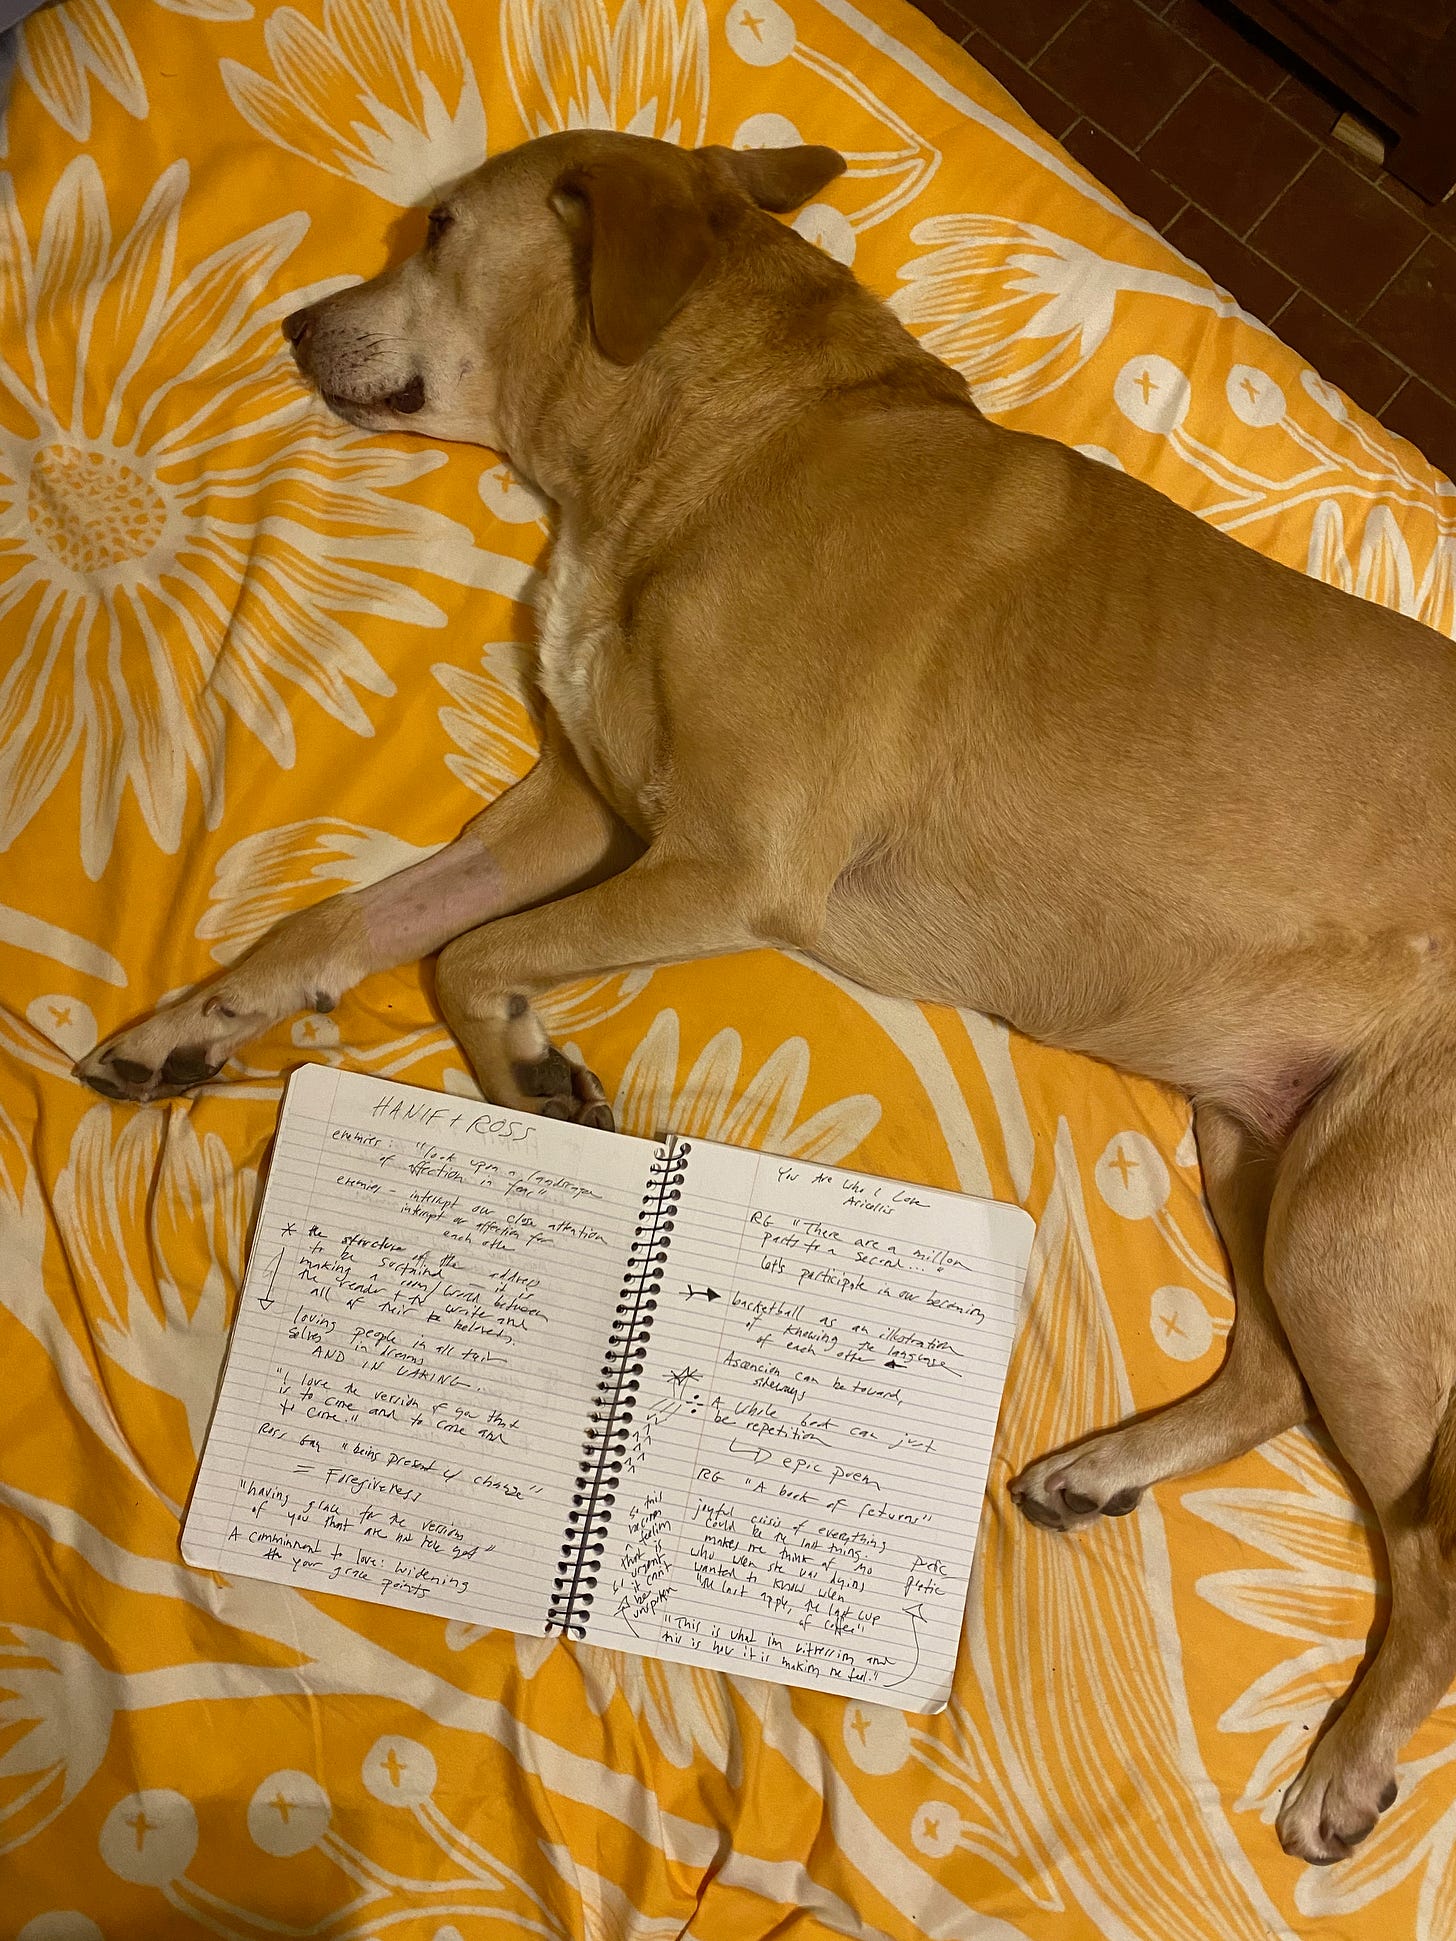 Nessa lying on her side on a yellow bedspread next to an open notebook full of scribbles from the talk.